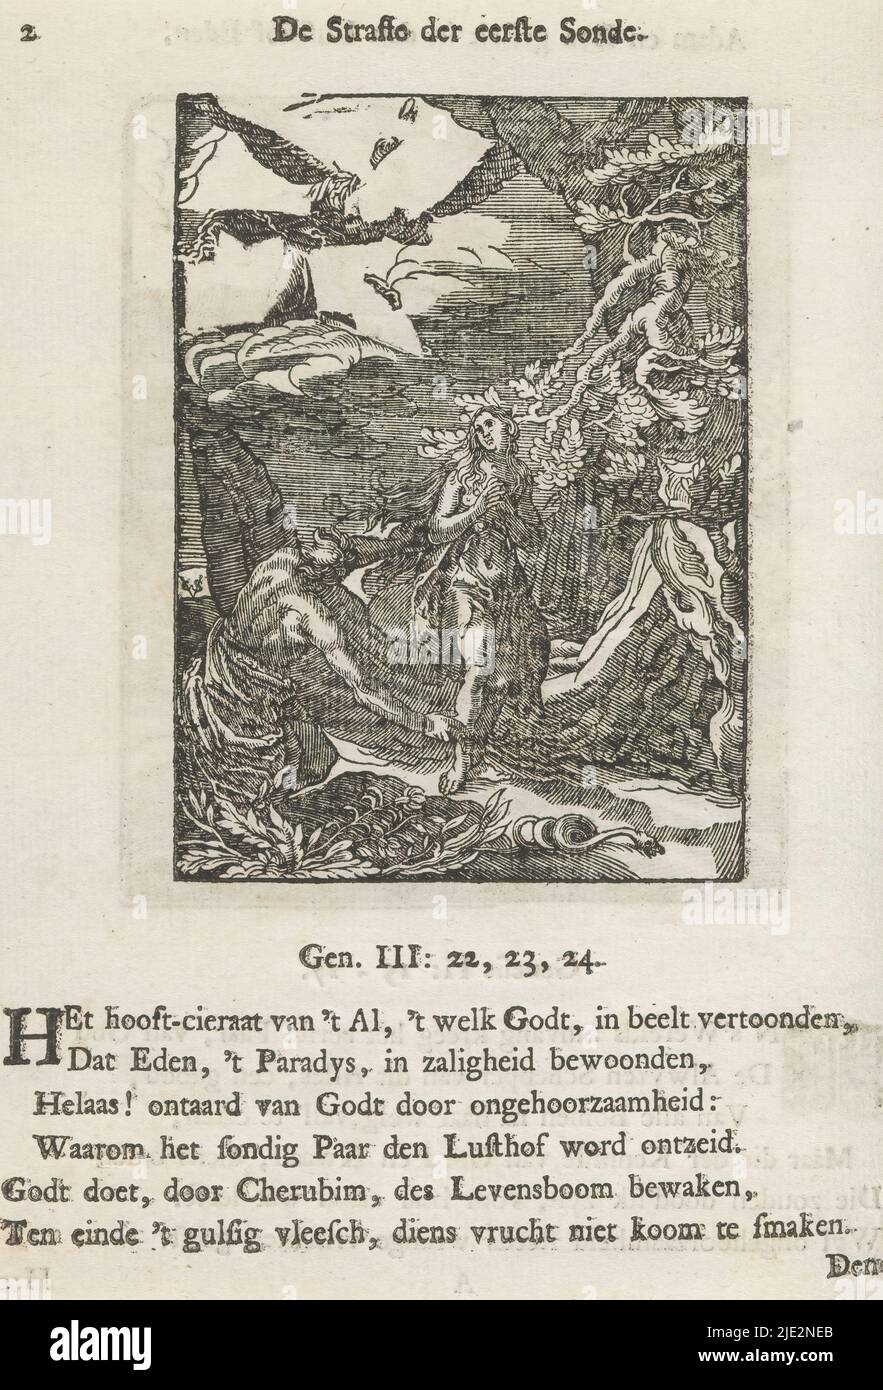 Expulsion from Paradise, Adam and Eve are expelled from the Earthly Paradise by the angel with the flaming sword. Next to them the serpent crawls. The image of the angel has been partially removed. Above the image a title. Below it are six verses and a reference to Genesis 3: 22-24. The print is part of an album., print maker: Christoffel van Sichem (II), (mentioned on object), print maker: Christoffel van Sichem (III), (mentioned on object), after print by: Jan Saenredam, print maker: Amsterdam, print maker: Amsterdam, after print by: Assendelft, publisher: Amsterdam, c. 1645 - c. 1646 and/or Stock Photo